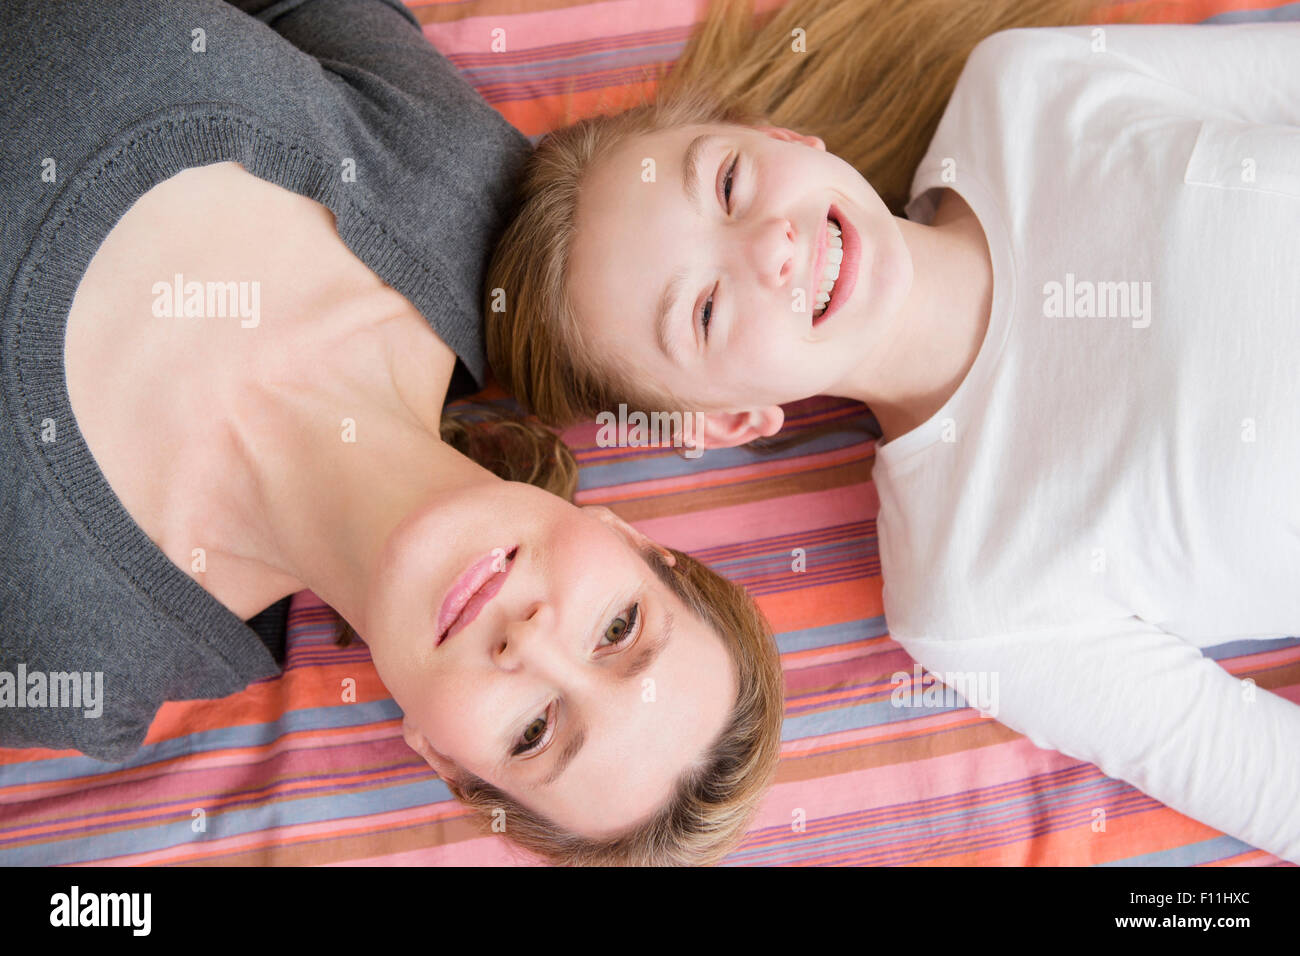 Caucasian mother and daughter laying on blanket Stock Photo